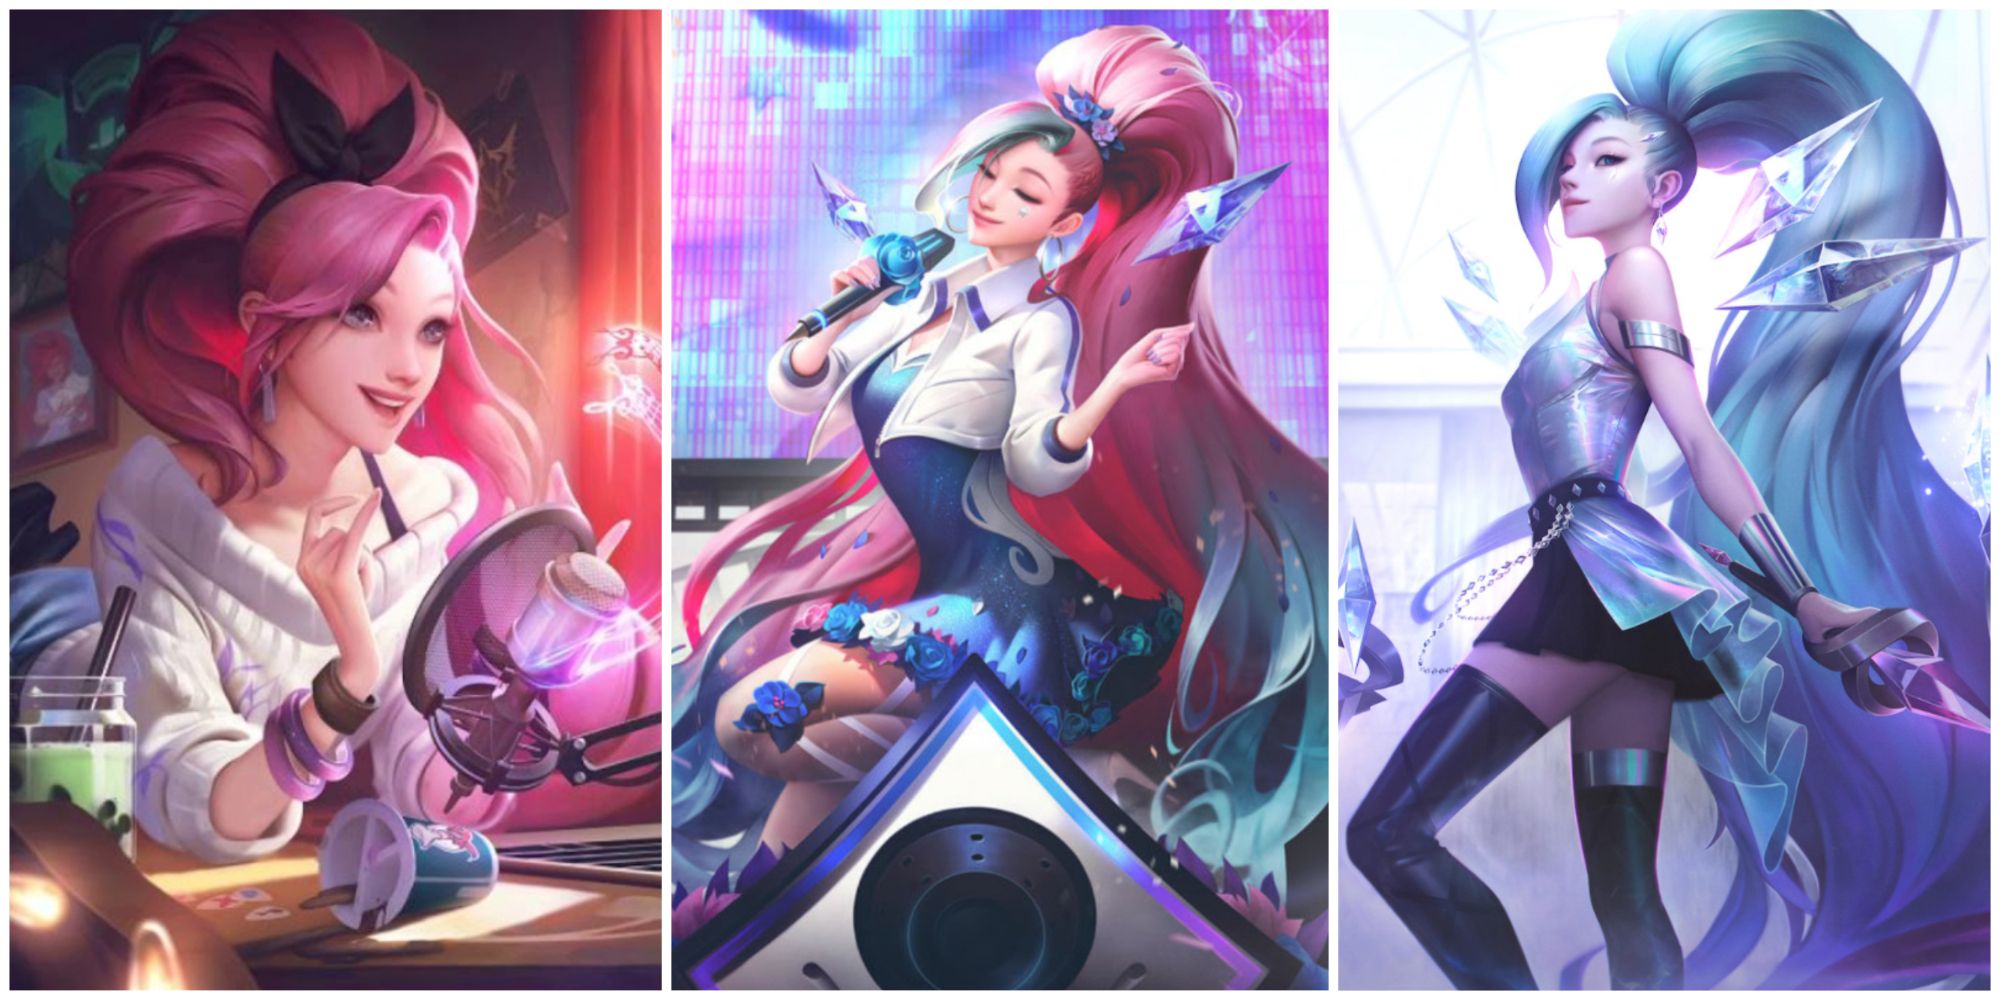 KDA ALL OUT Seraphine Ultimate skin where she starts indie, becomes a rising star, and then a fully realized pop star 